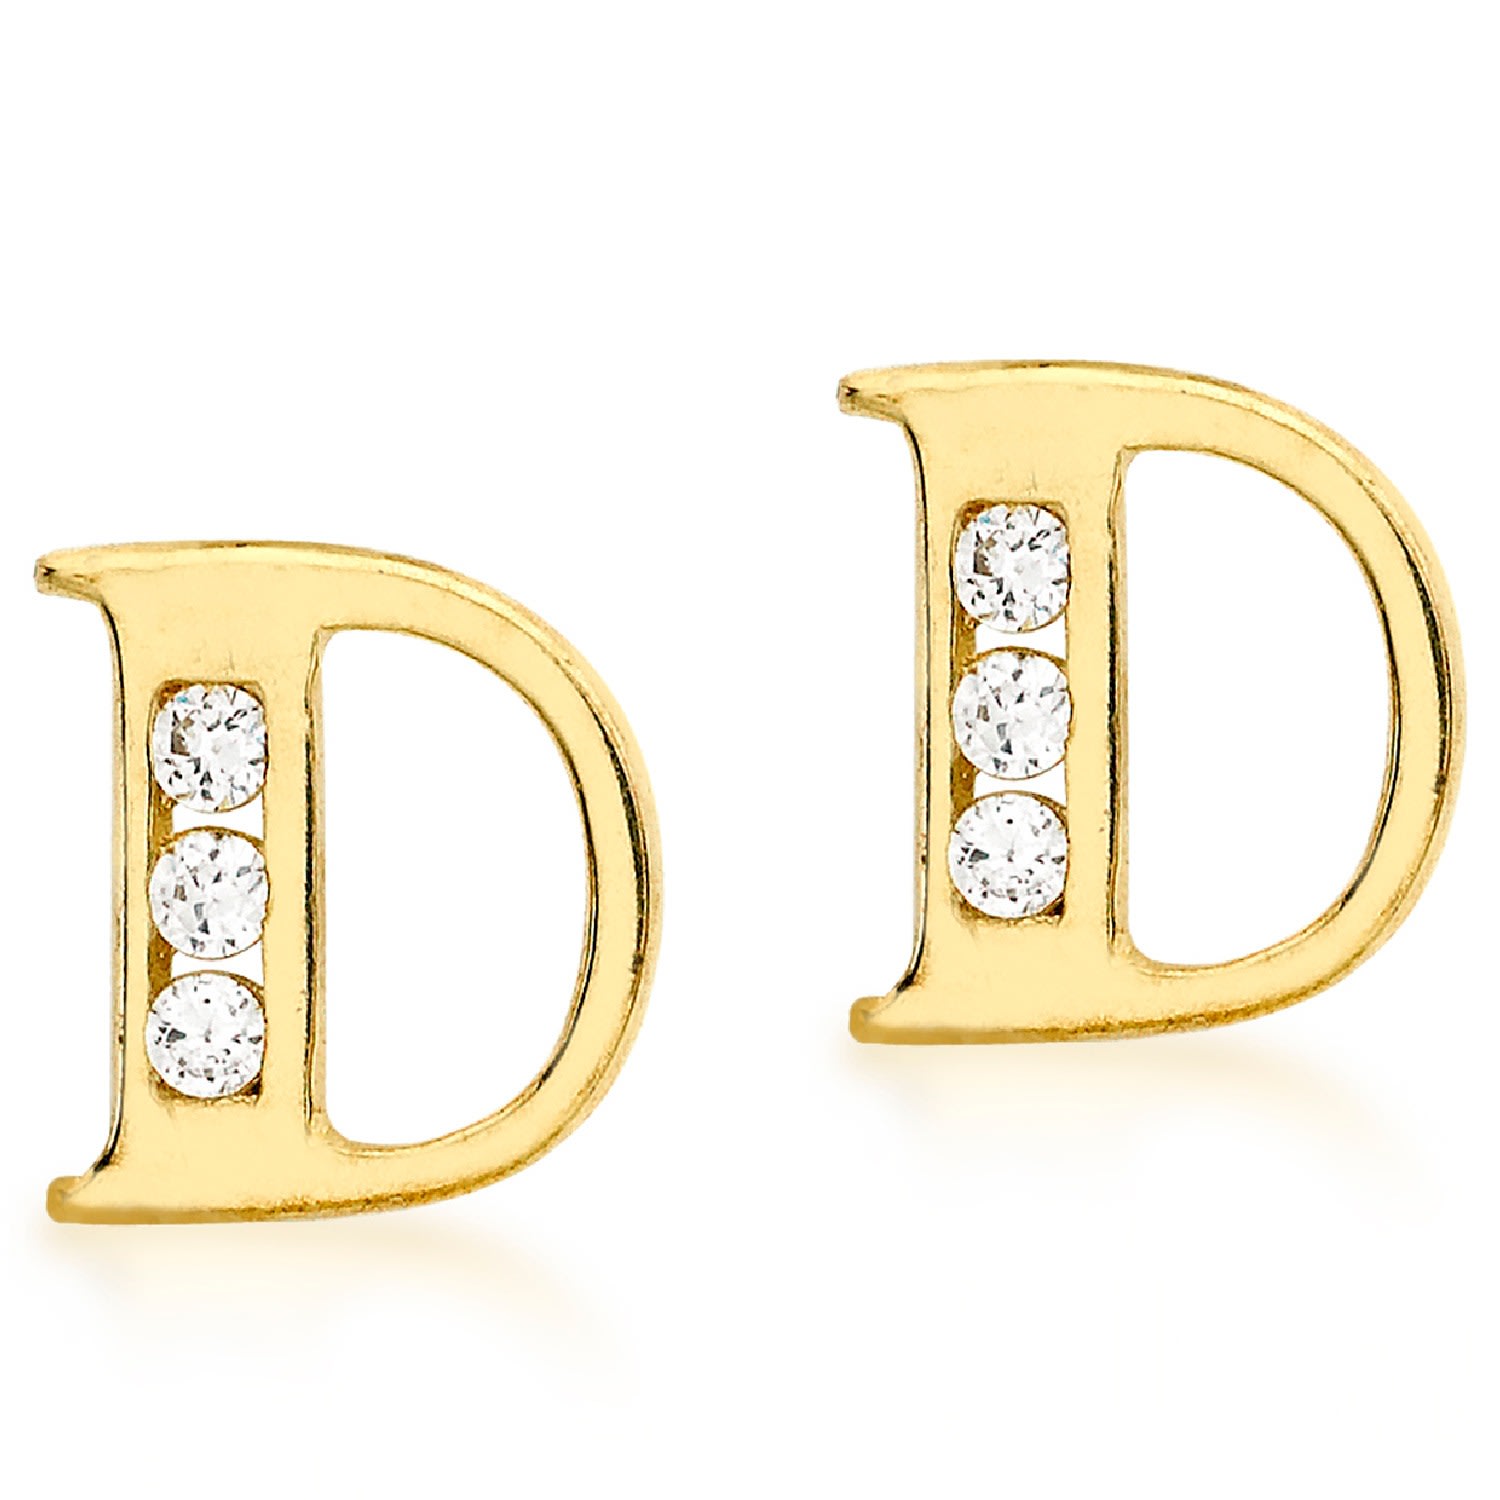 Posh Totty Designs Women's Gold Initial Earrings With Cubic Zirconia